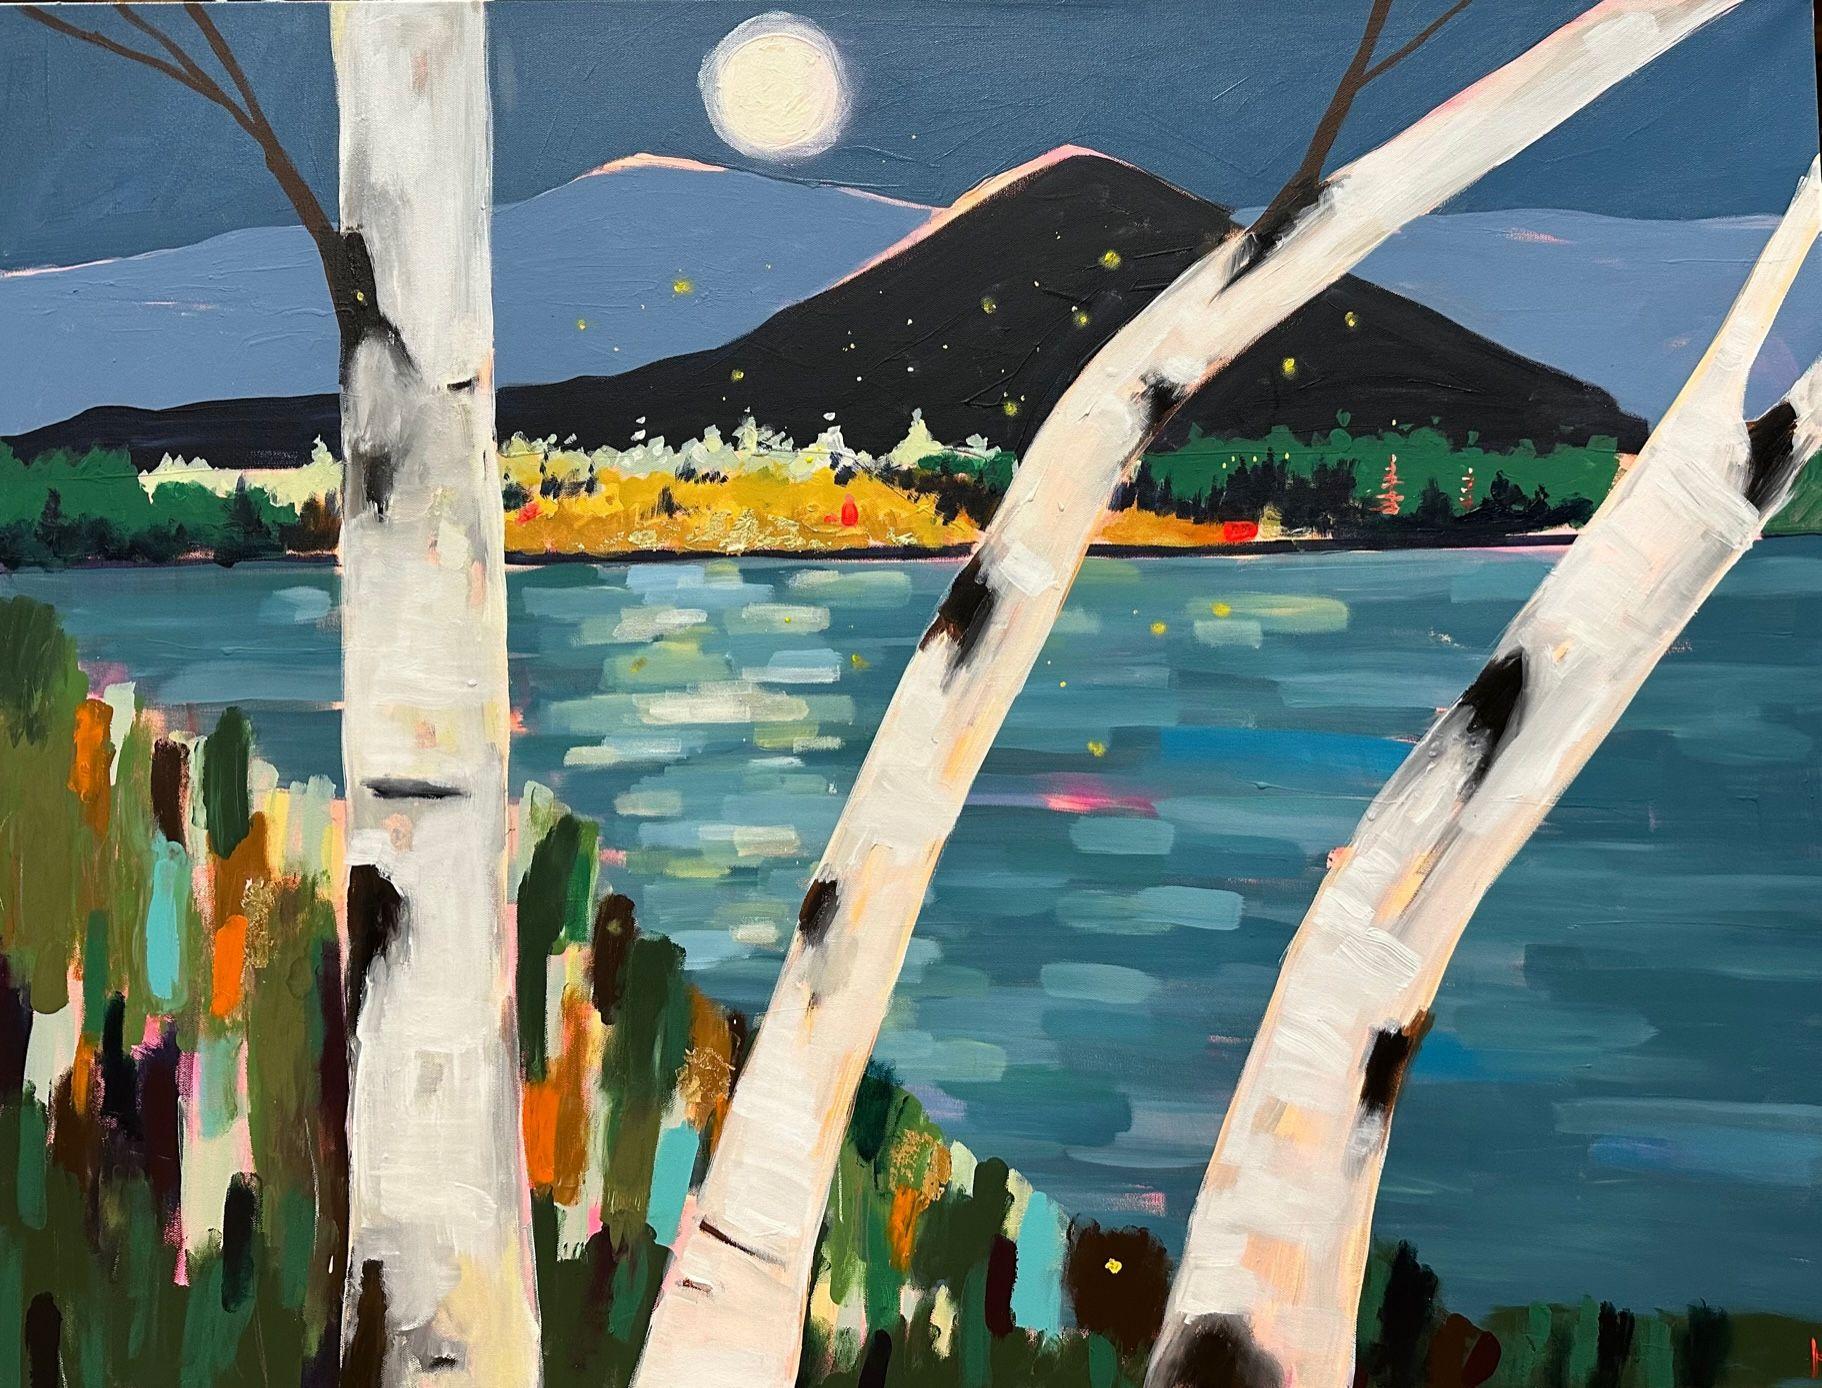 Rebecca Klementovich Abstract Painting - Moon, Fireflies, and BIrches, Painting, Acrylic on Canvas